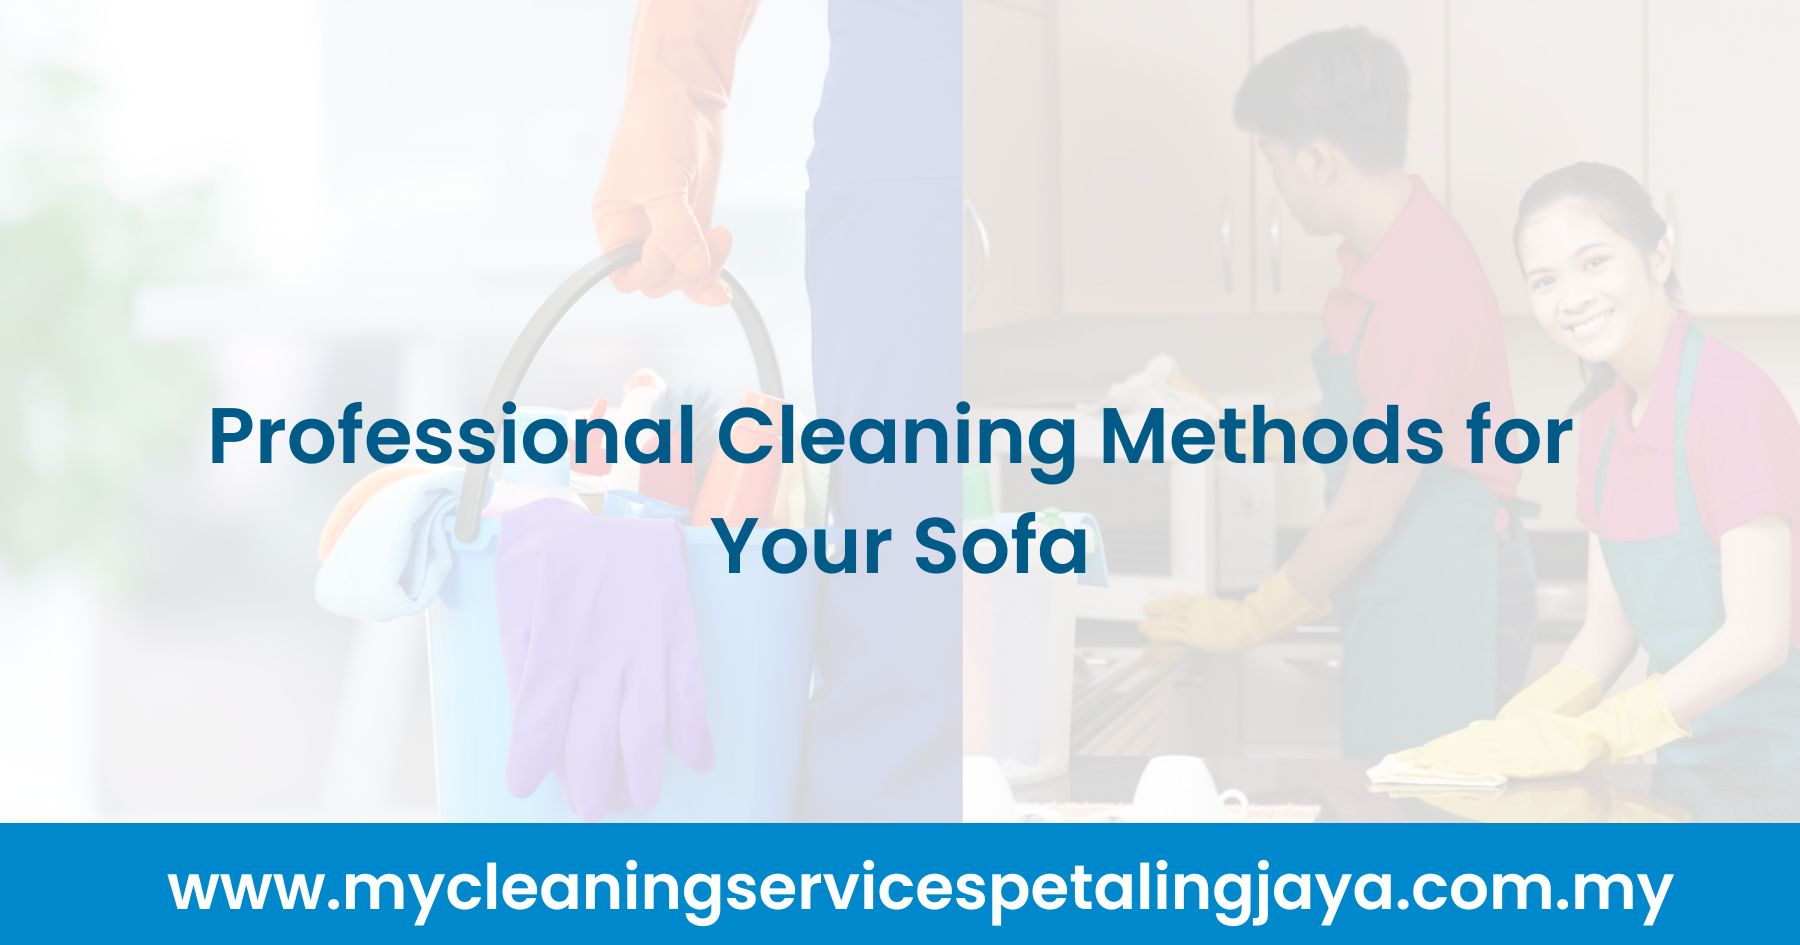 Professional Cleaning Methods for Your Sofa